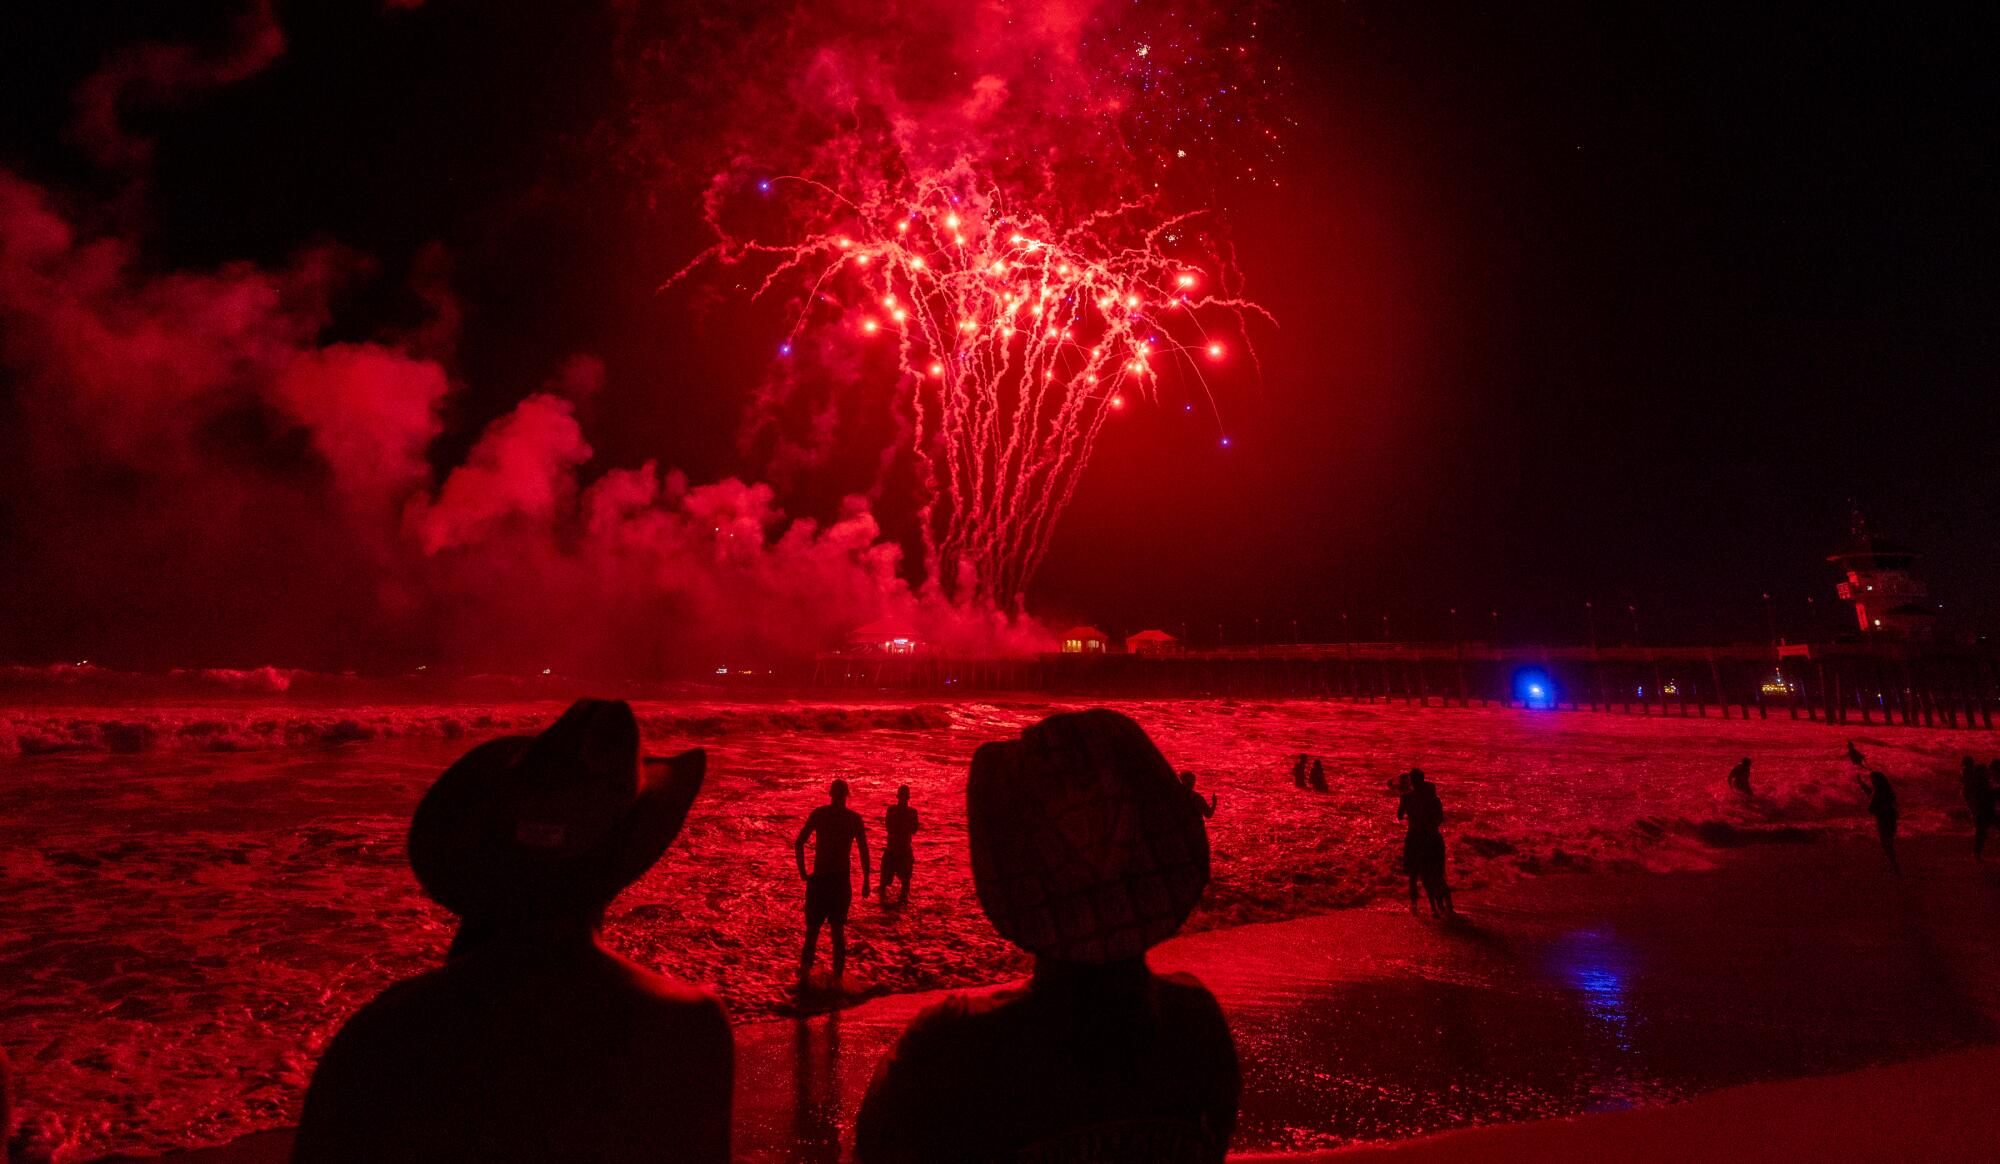 Two people watch the sky light up with fireworks over Huntington Beach.